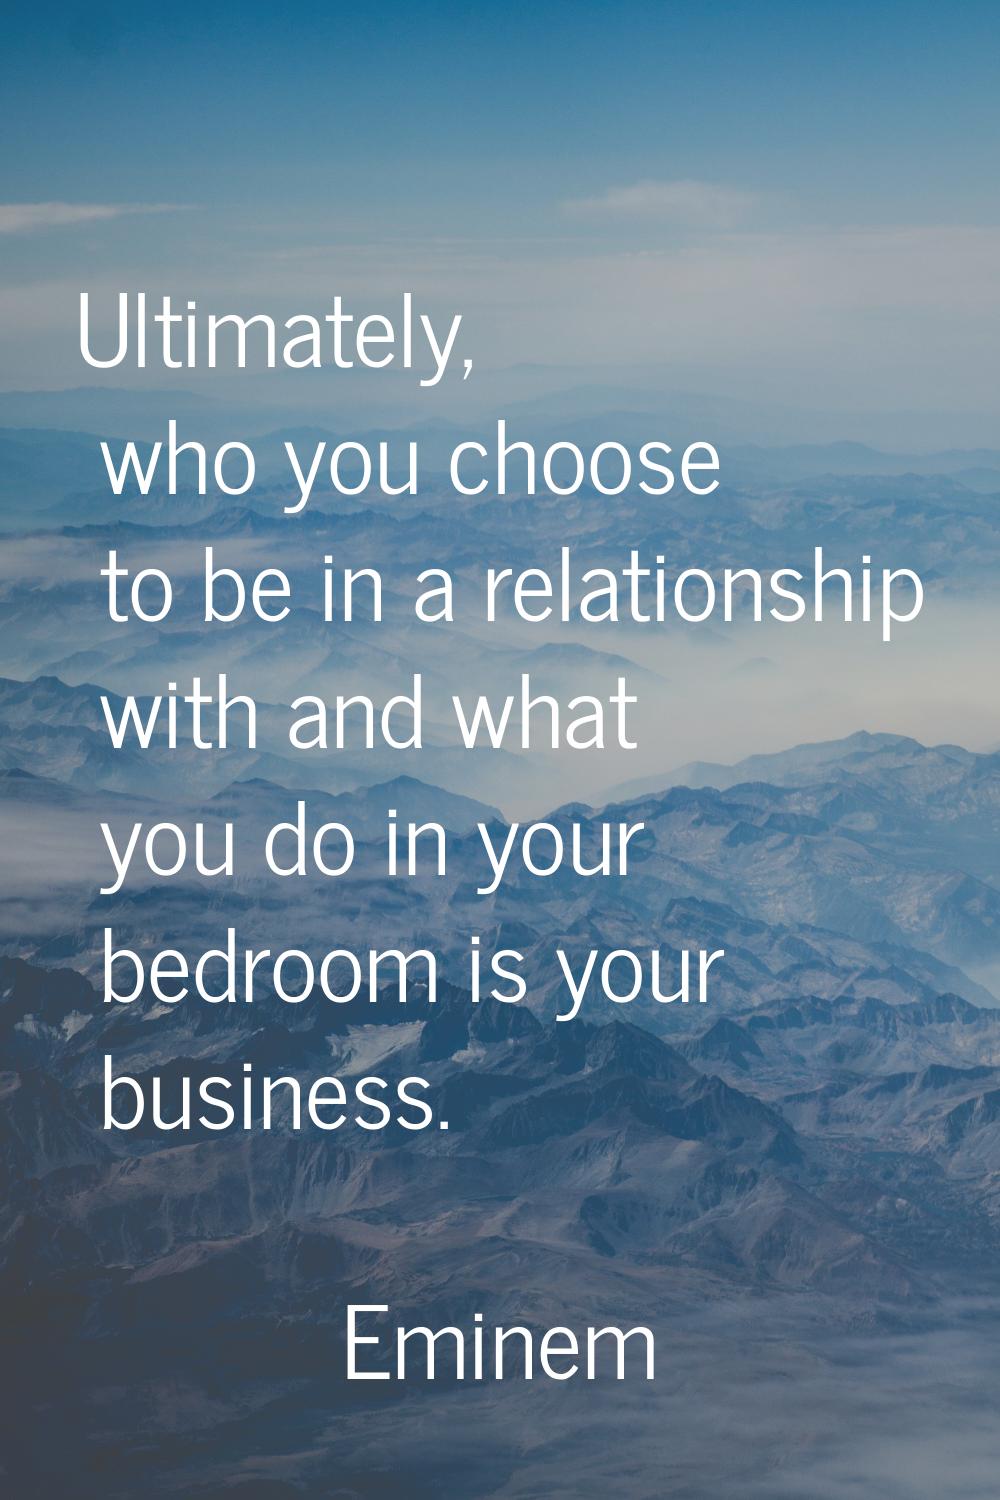 Ultimately, who you choose to be in a relationship with and what you do in your bedroom is your bus